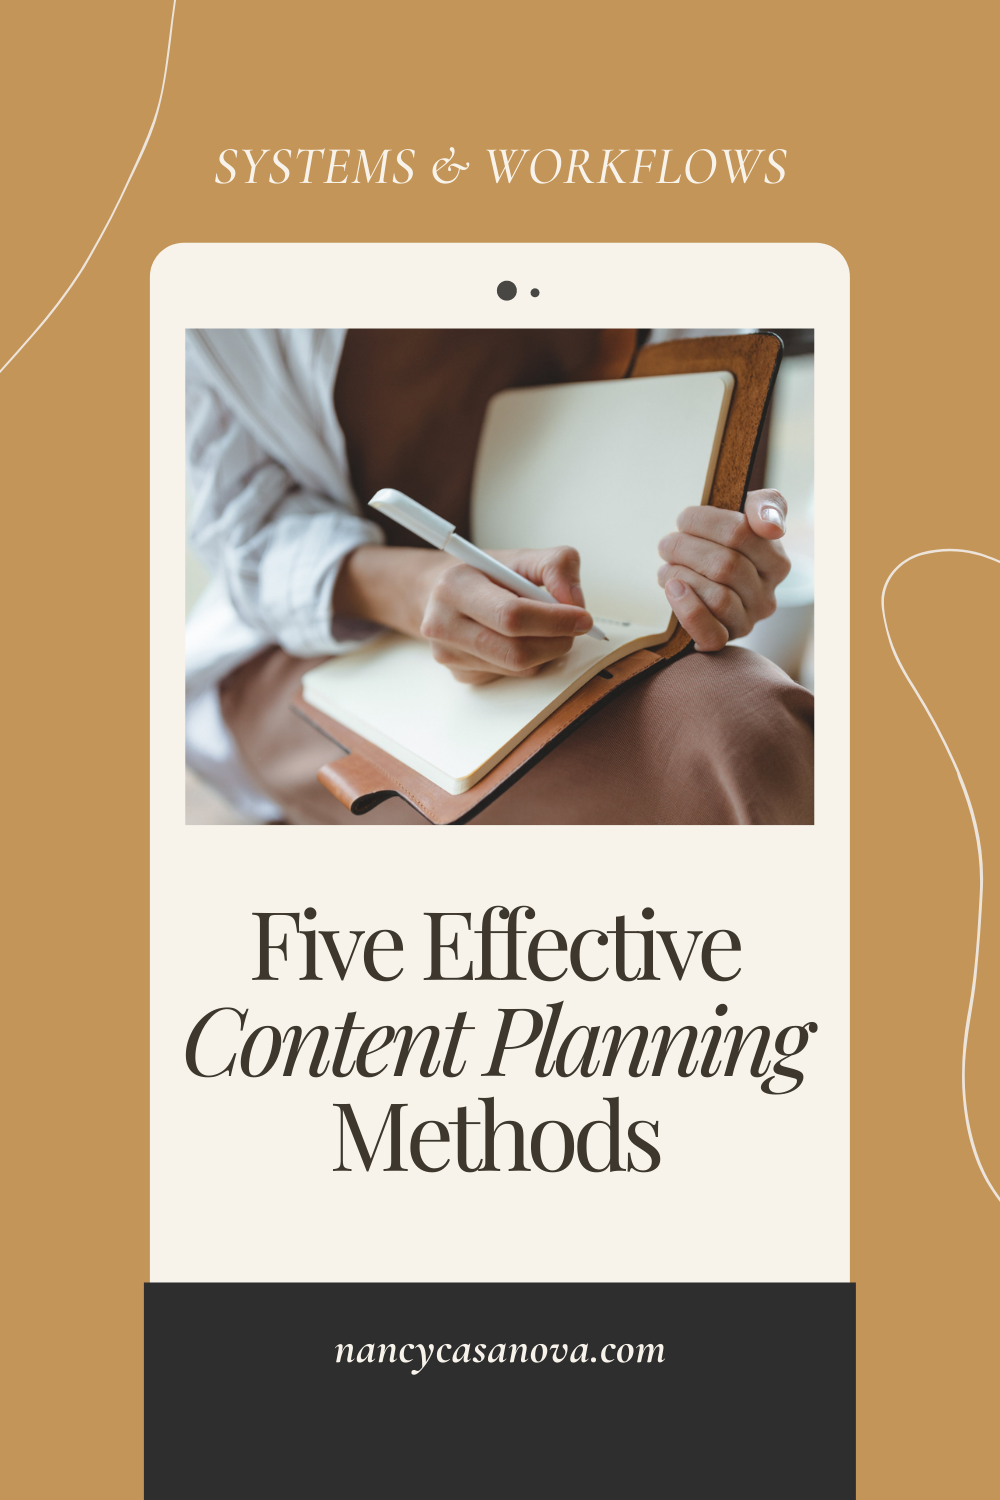 Do you need an easier method to plan and map out your content on a daily, weekly or monthly basis? Check out this content planning method that will help you simplify and streamline your content marketing.